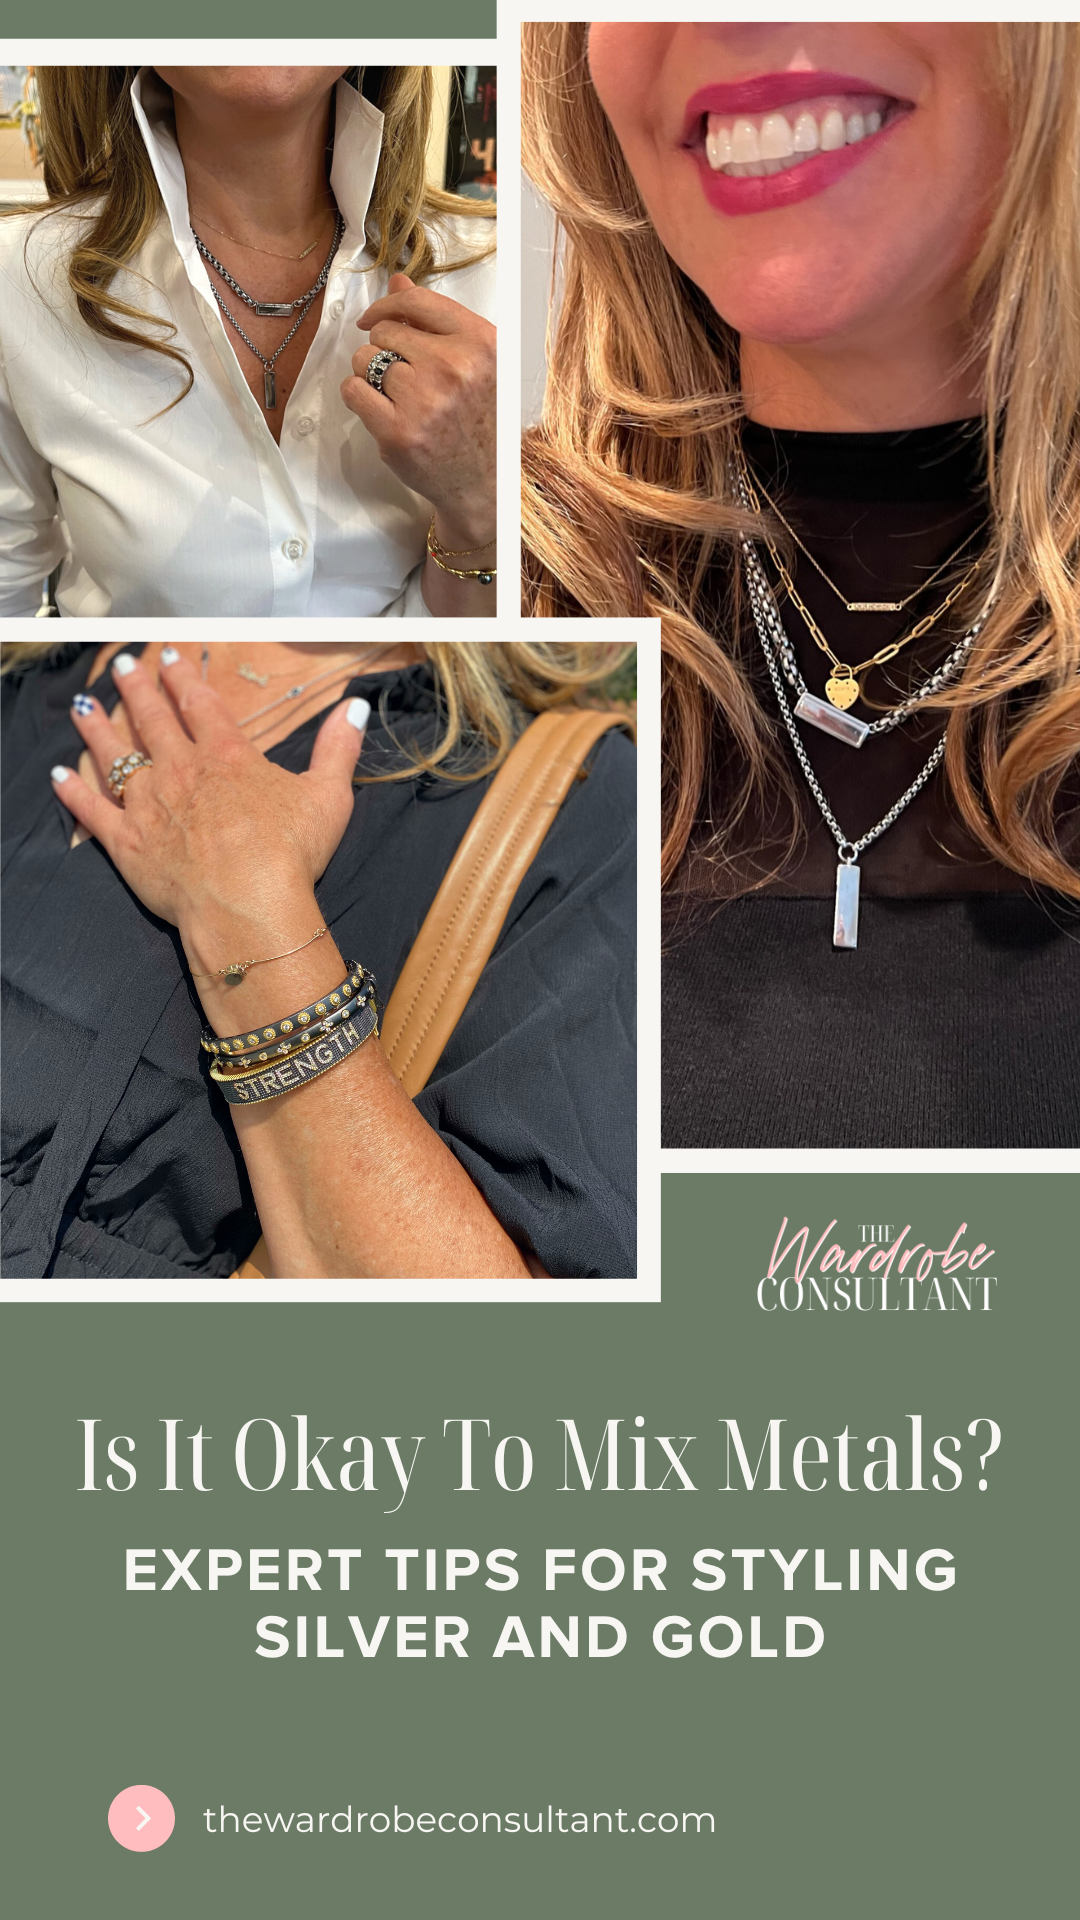 Is It Okay To Mix Metals? Expert Tips For Styling Silver and Gold